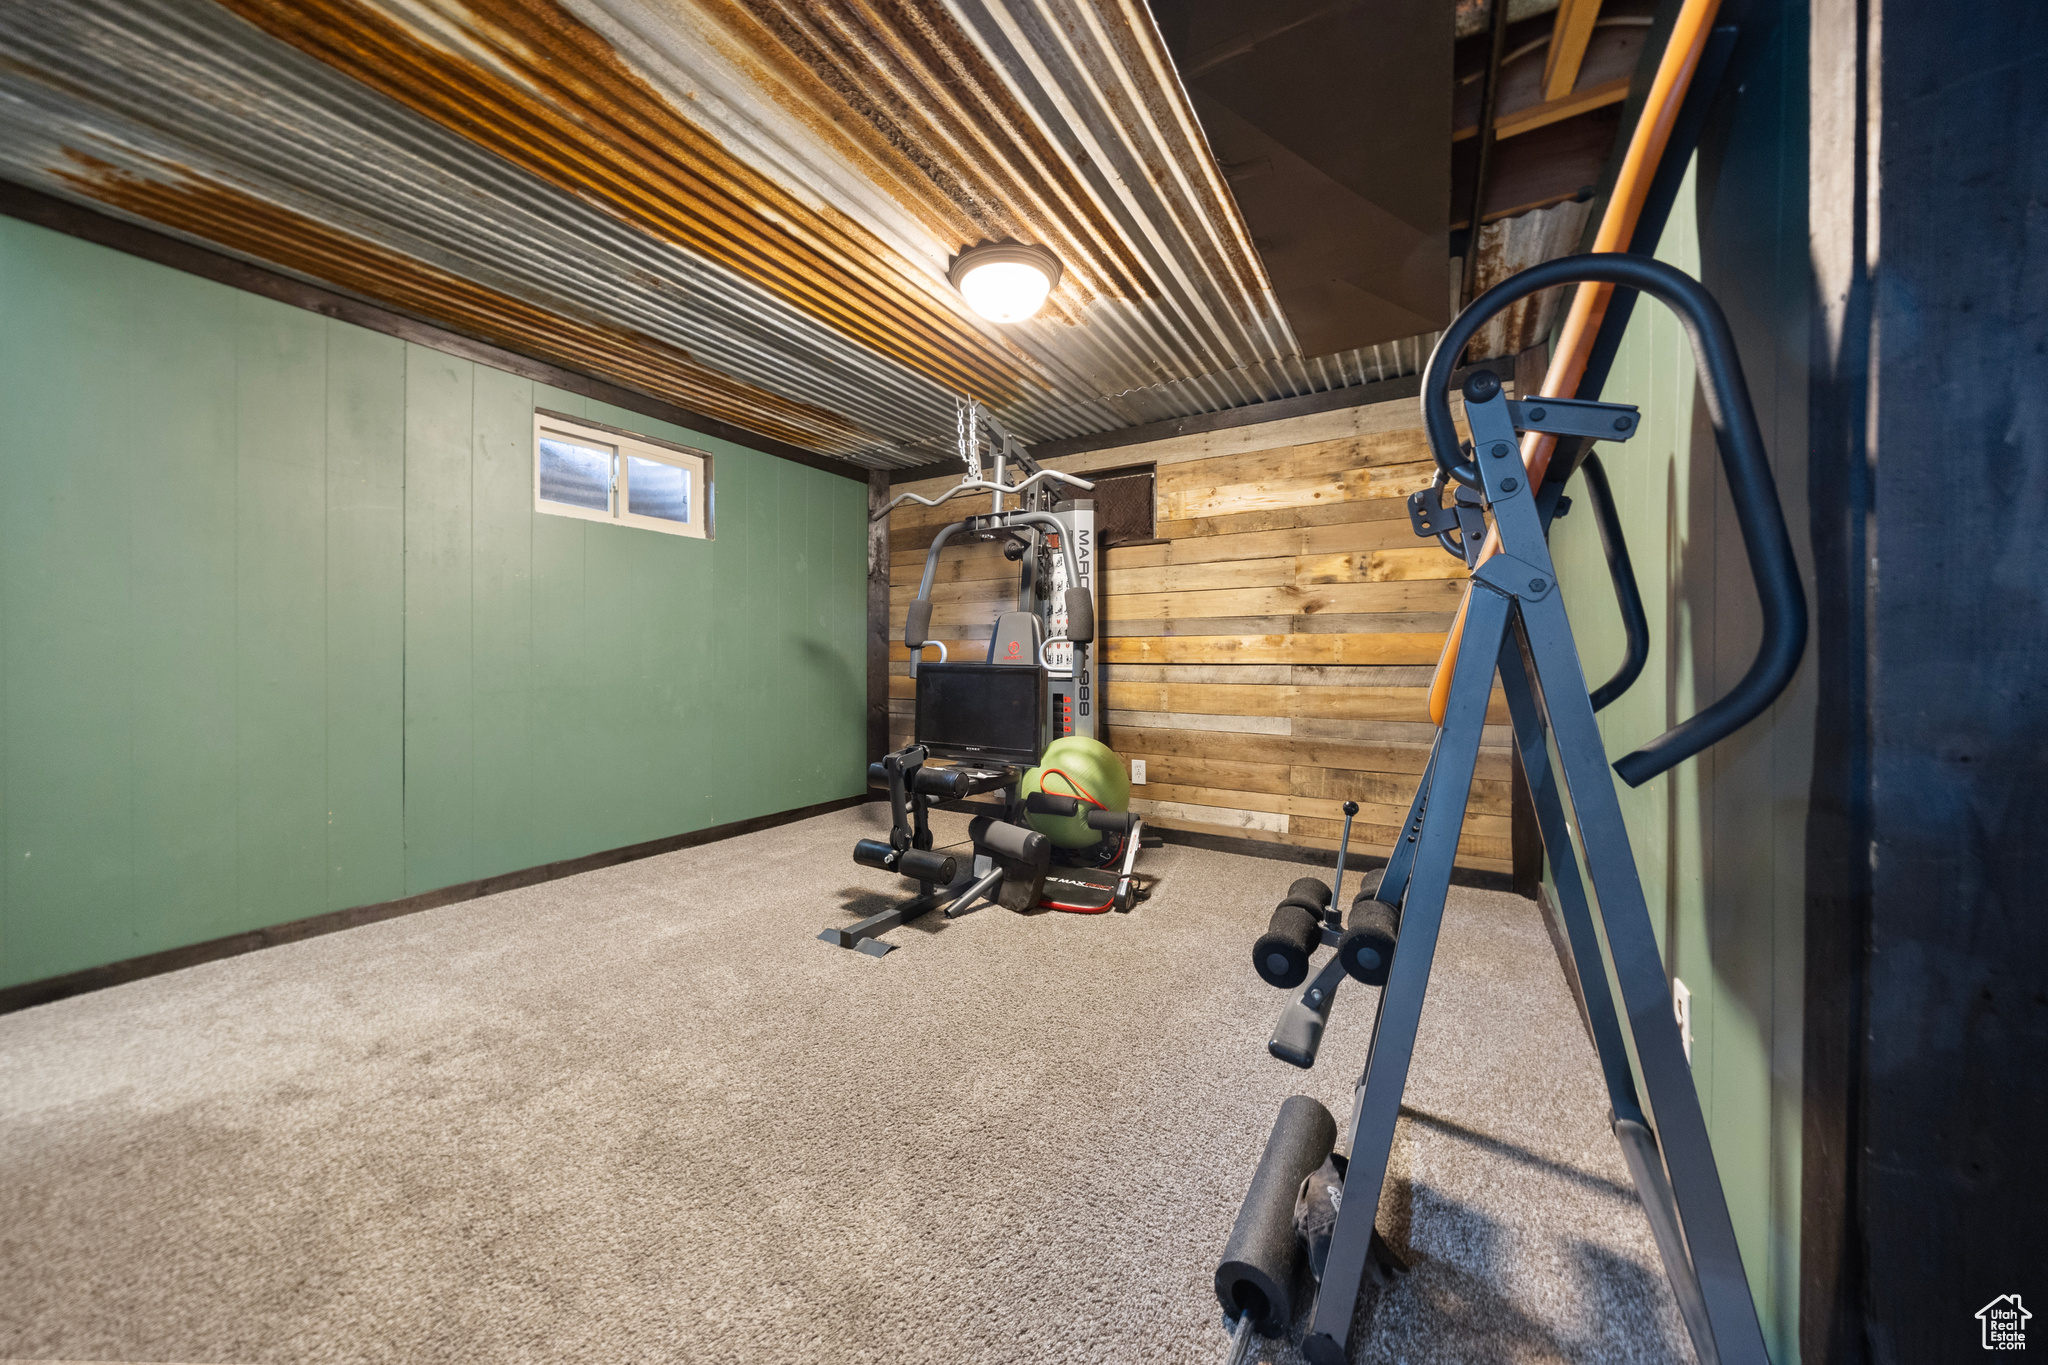 Exercise area featuring carpet and wooden walls